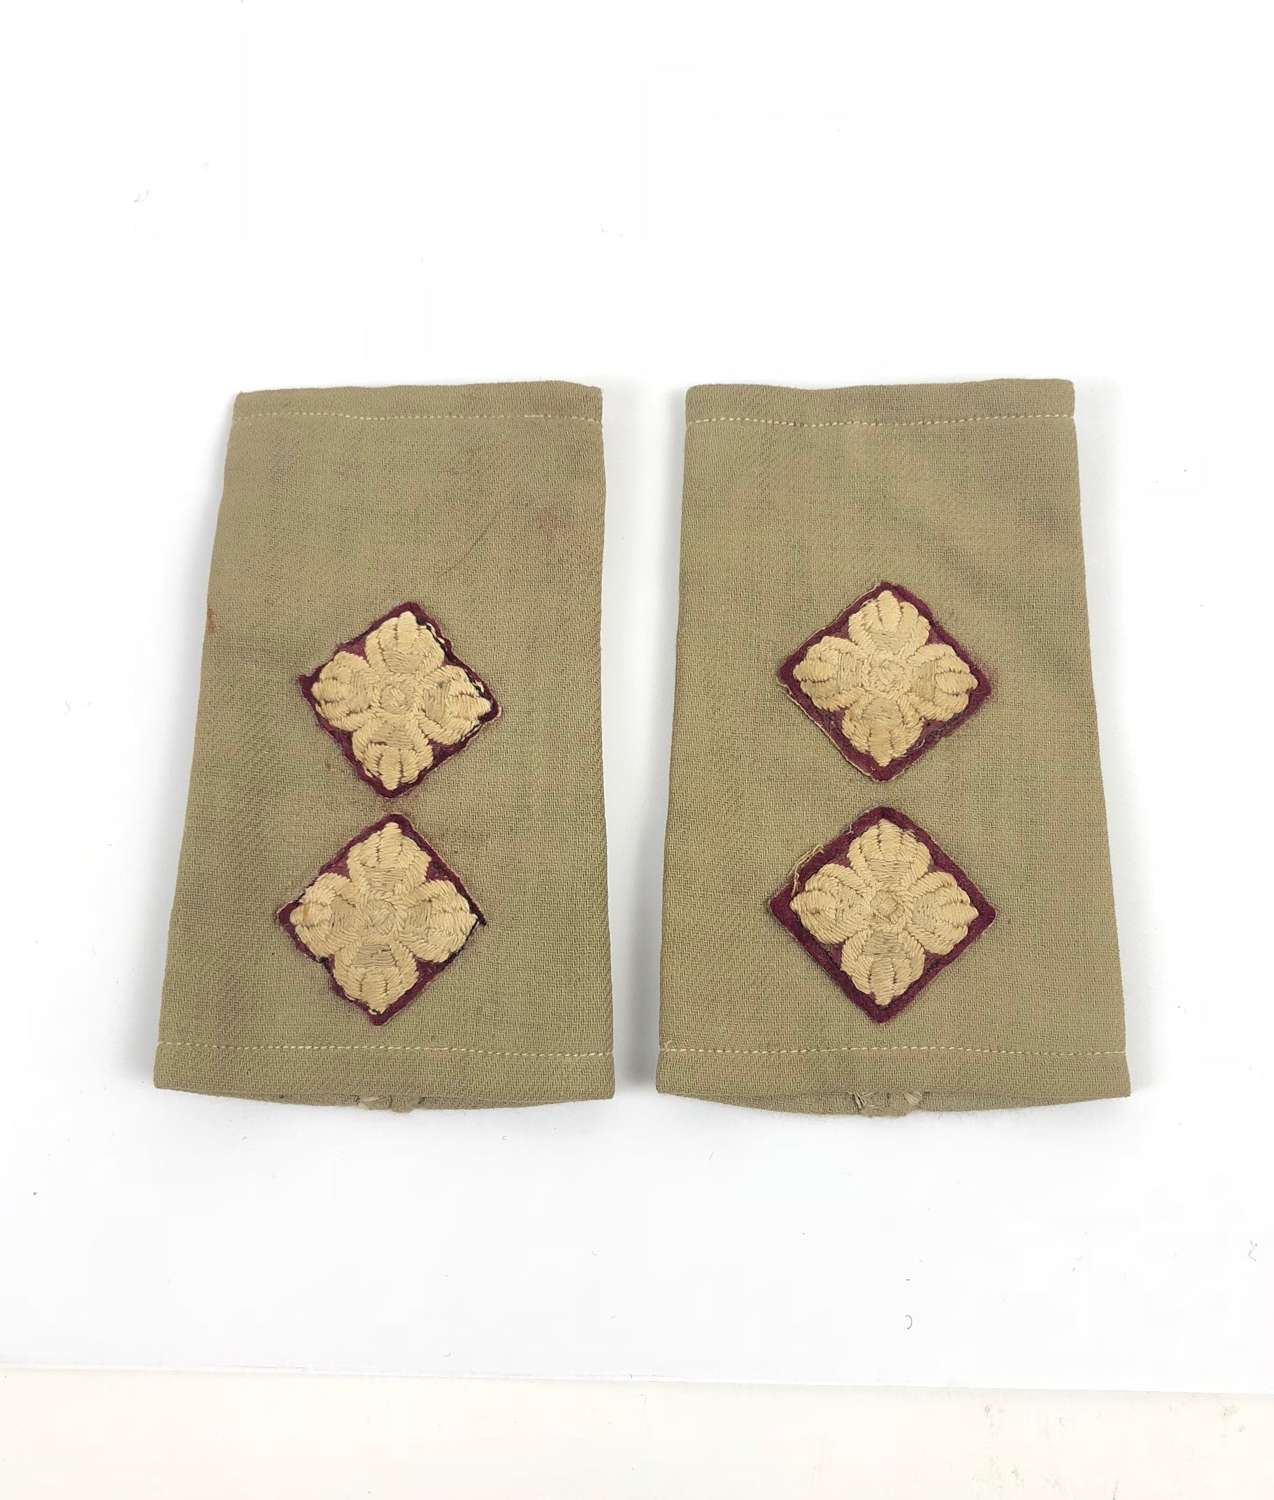 WW2 Period Middle East Officer Slip On Rank Badge.